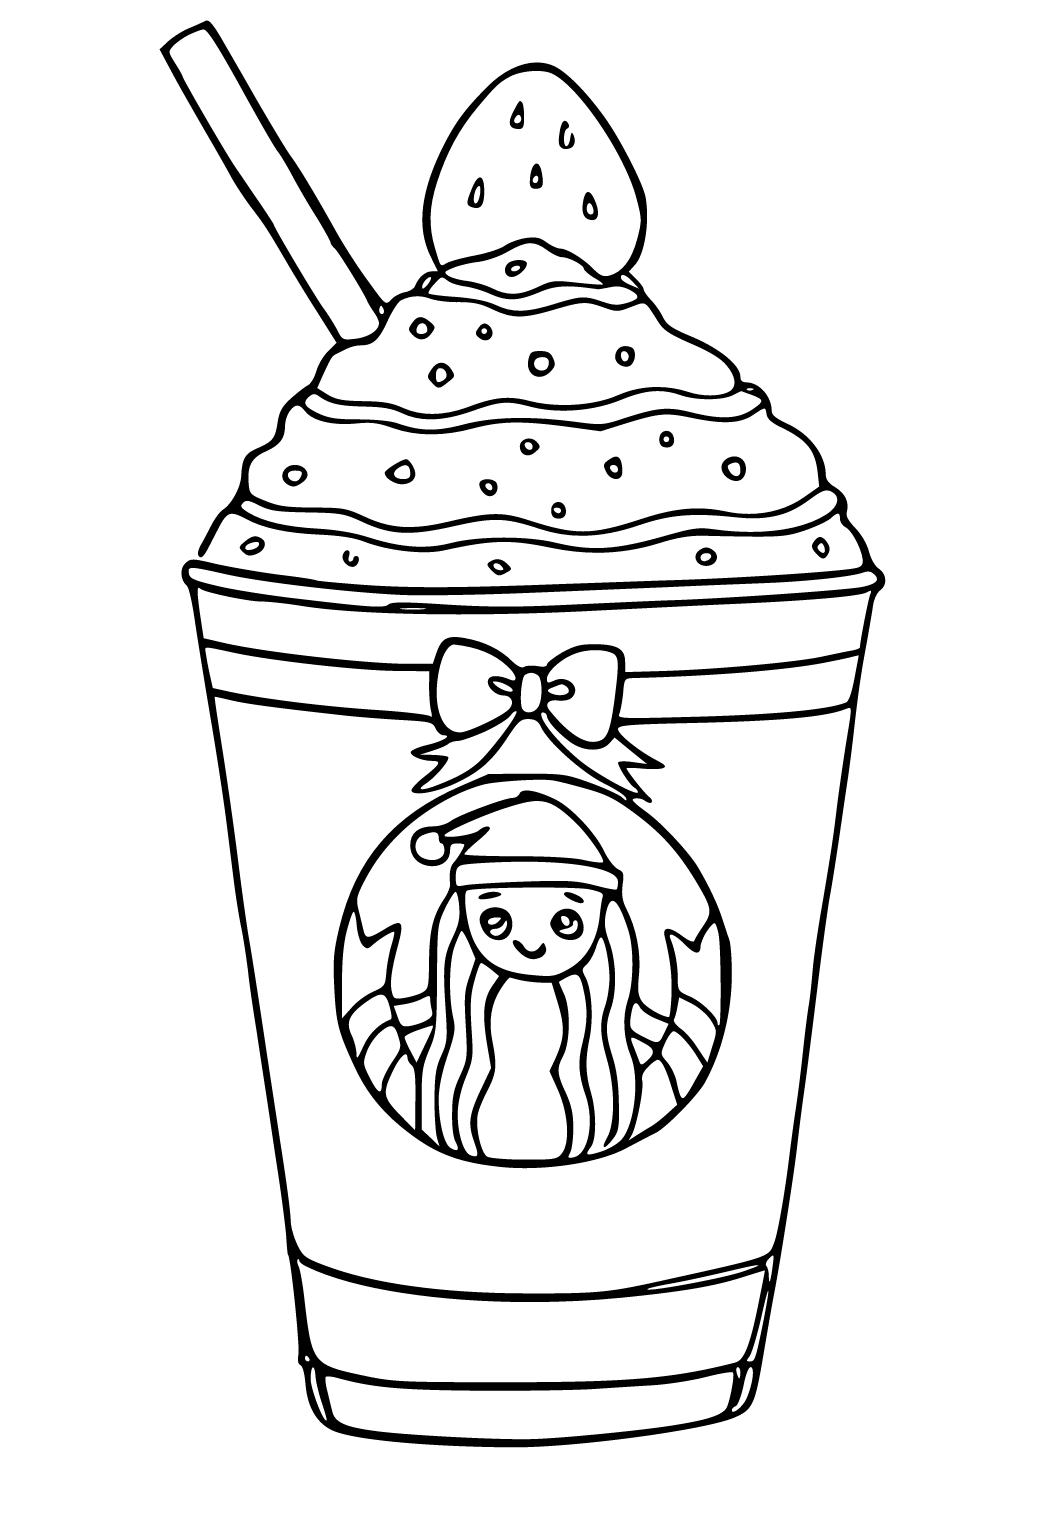 Free printable starbucks strawberry coloring page for adults and kids